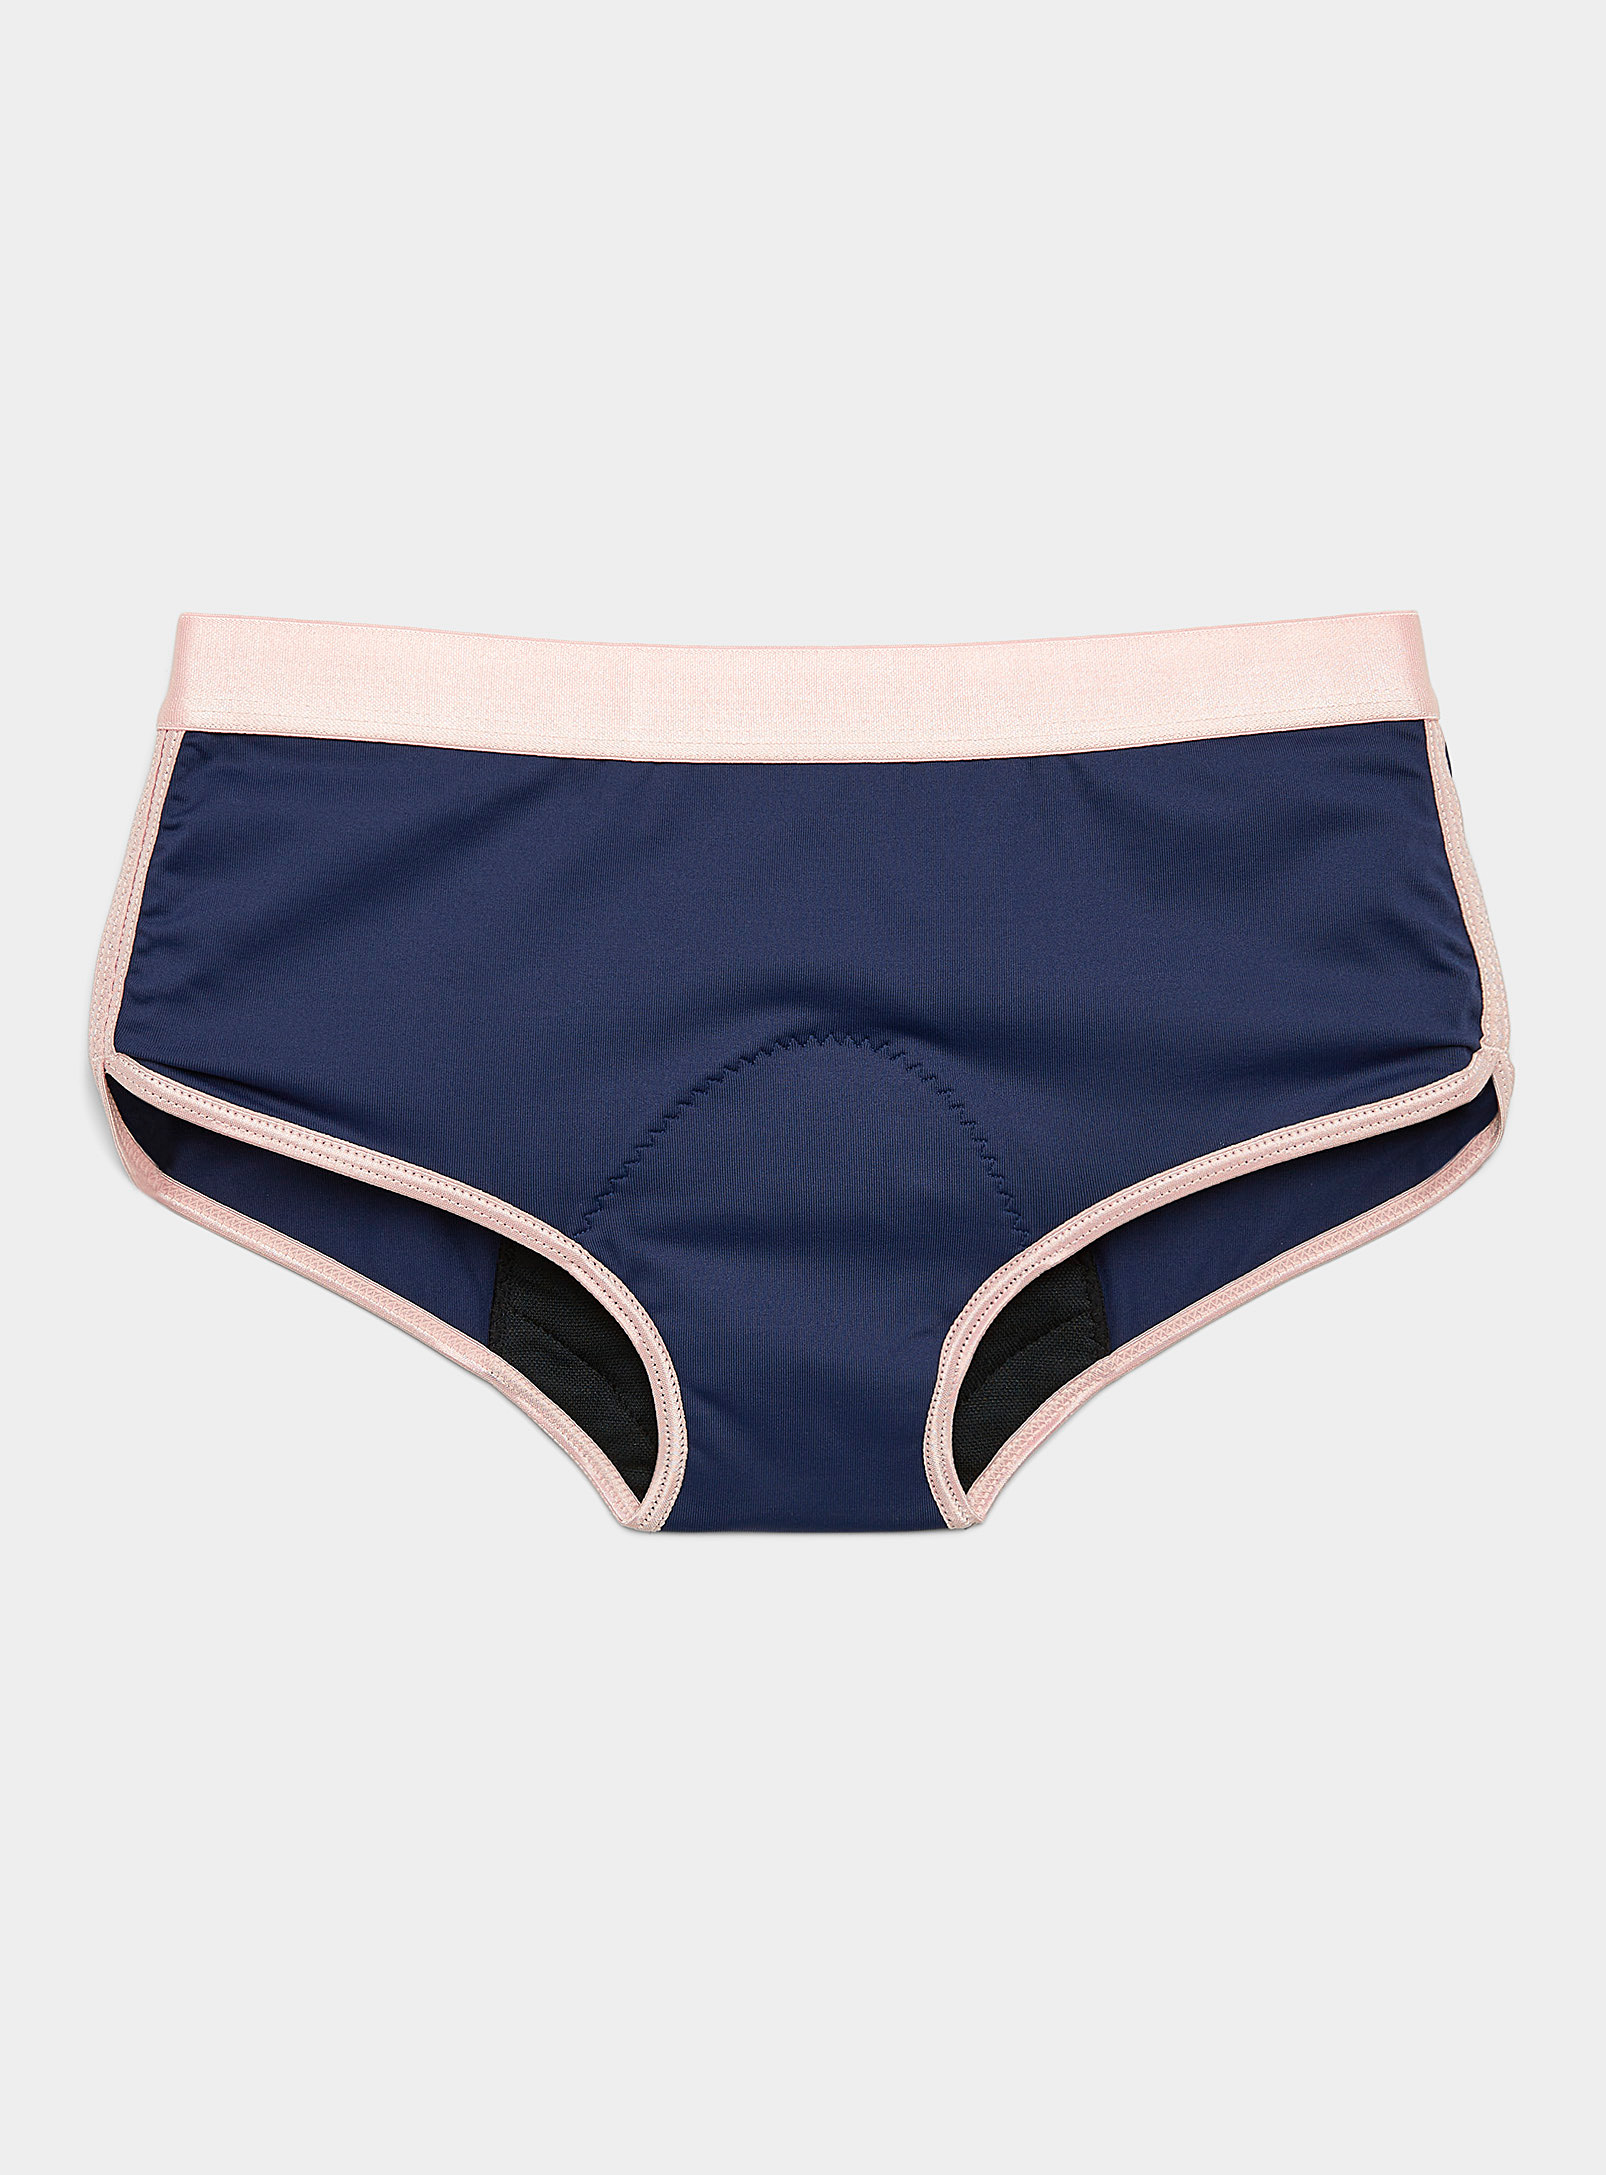 Pantys Dreamer Period Panty Overnight Flow In Marine Blue